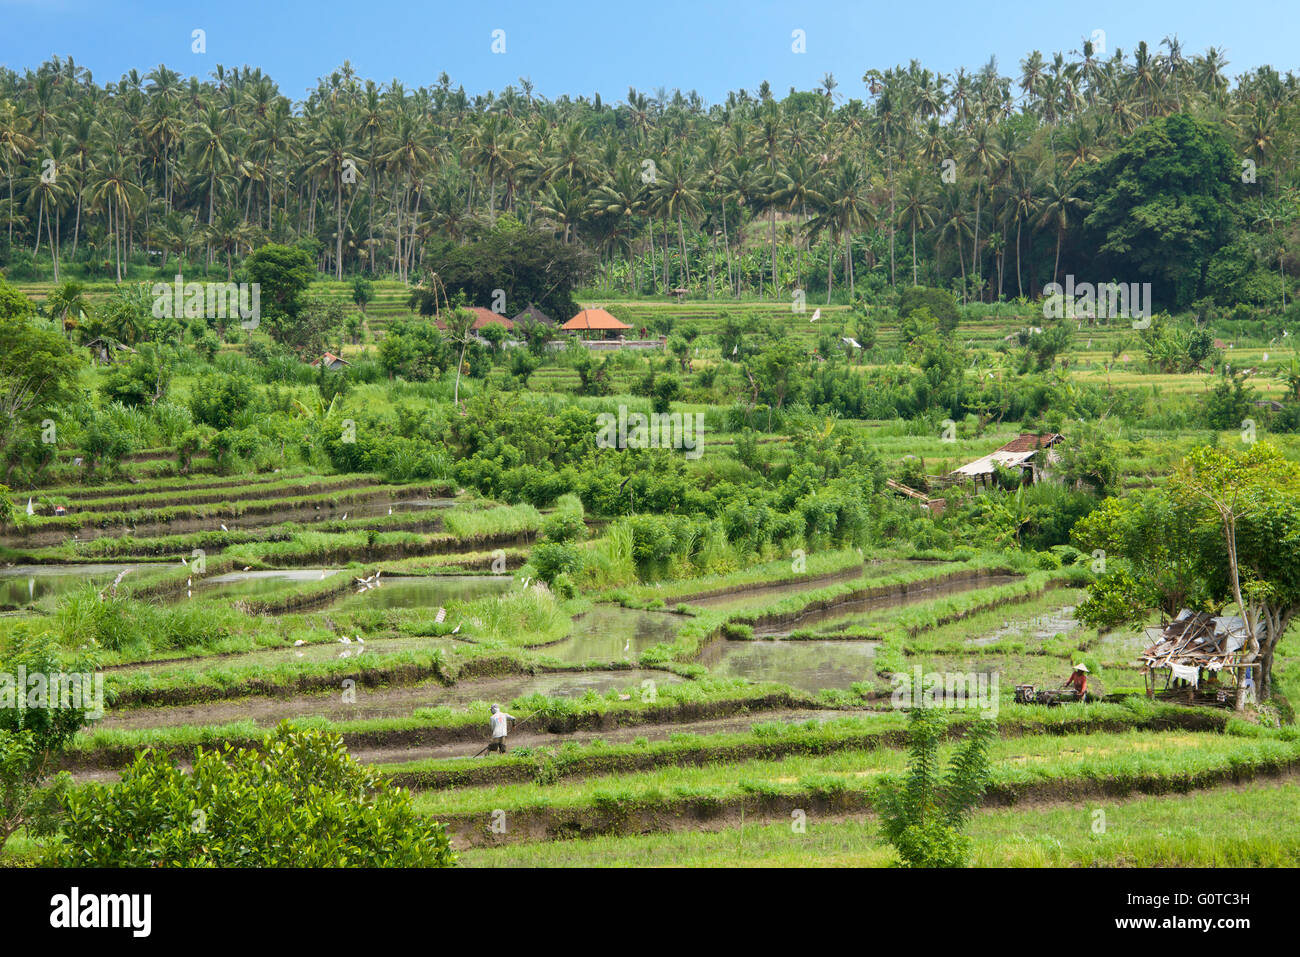 Rural countryside with rice paddies Abang Bali Indonesia Stock Photo